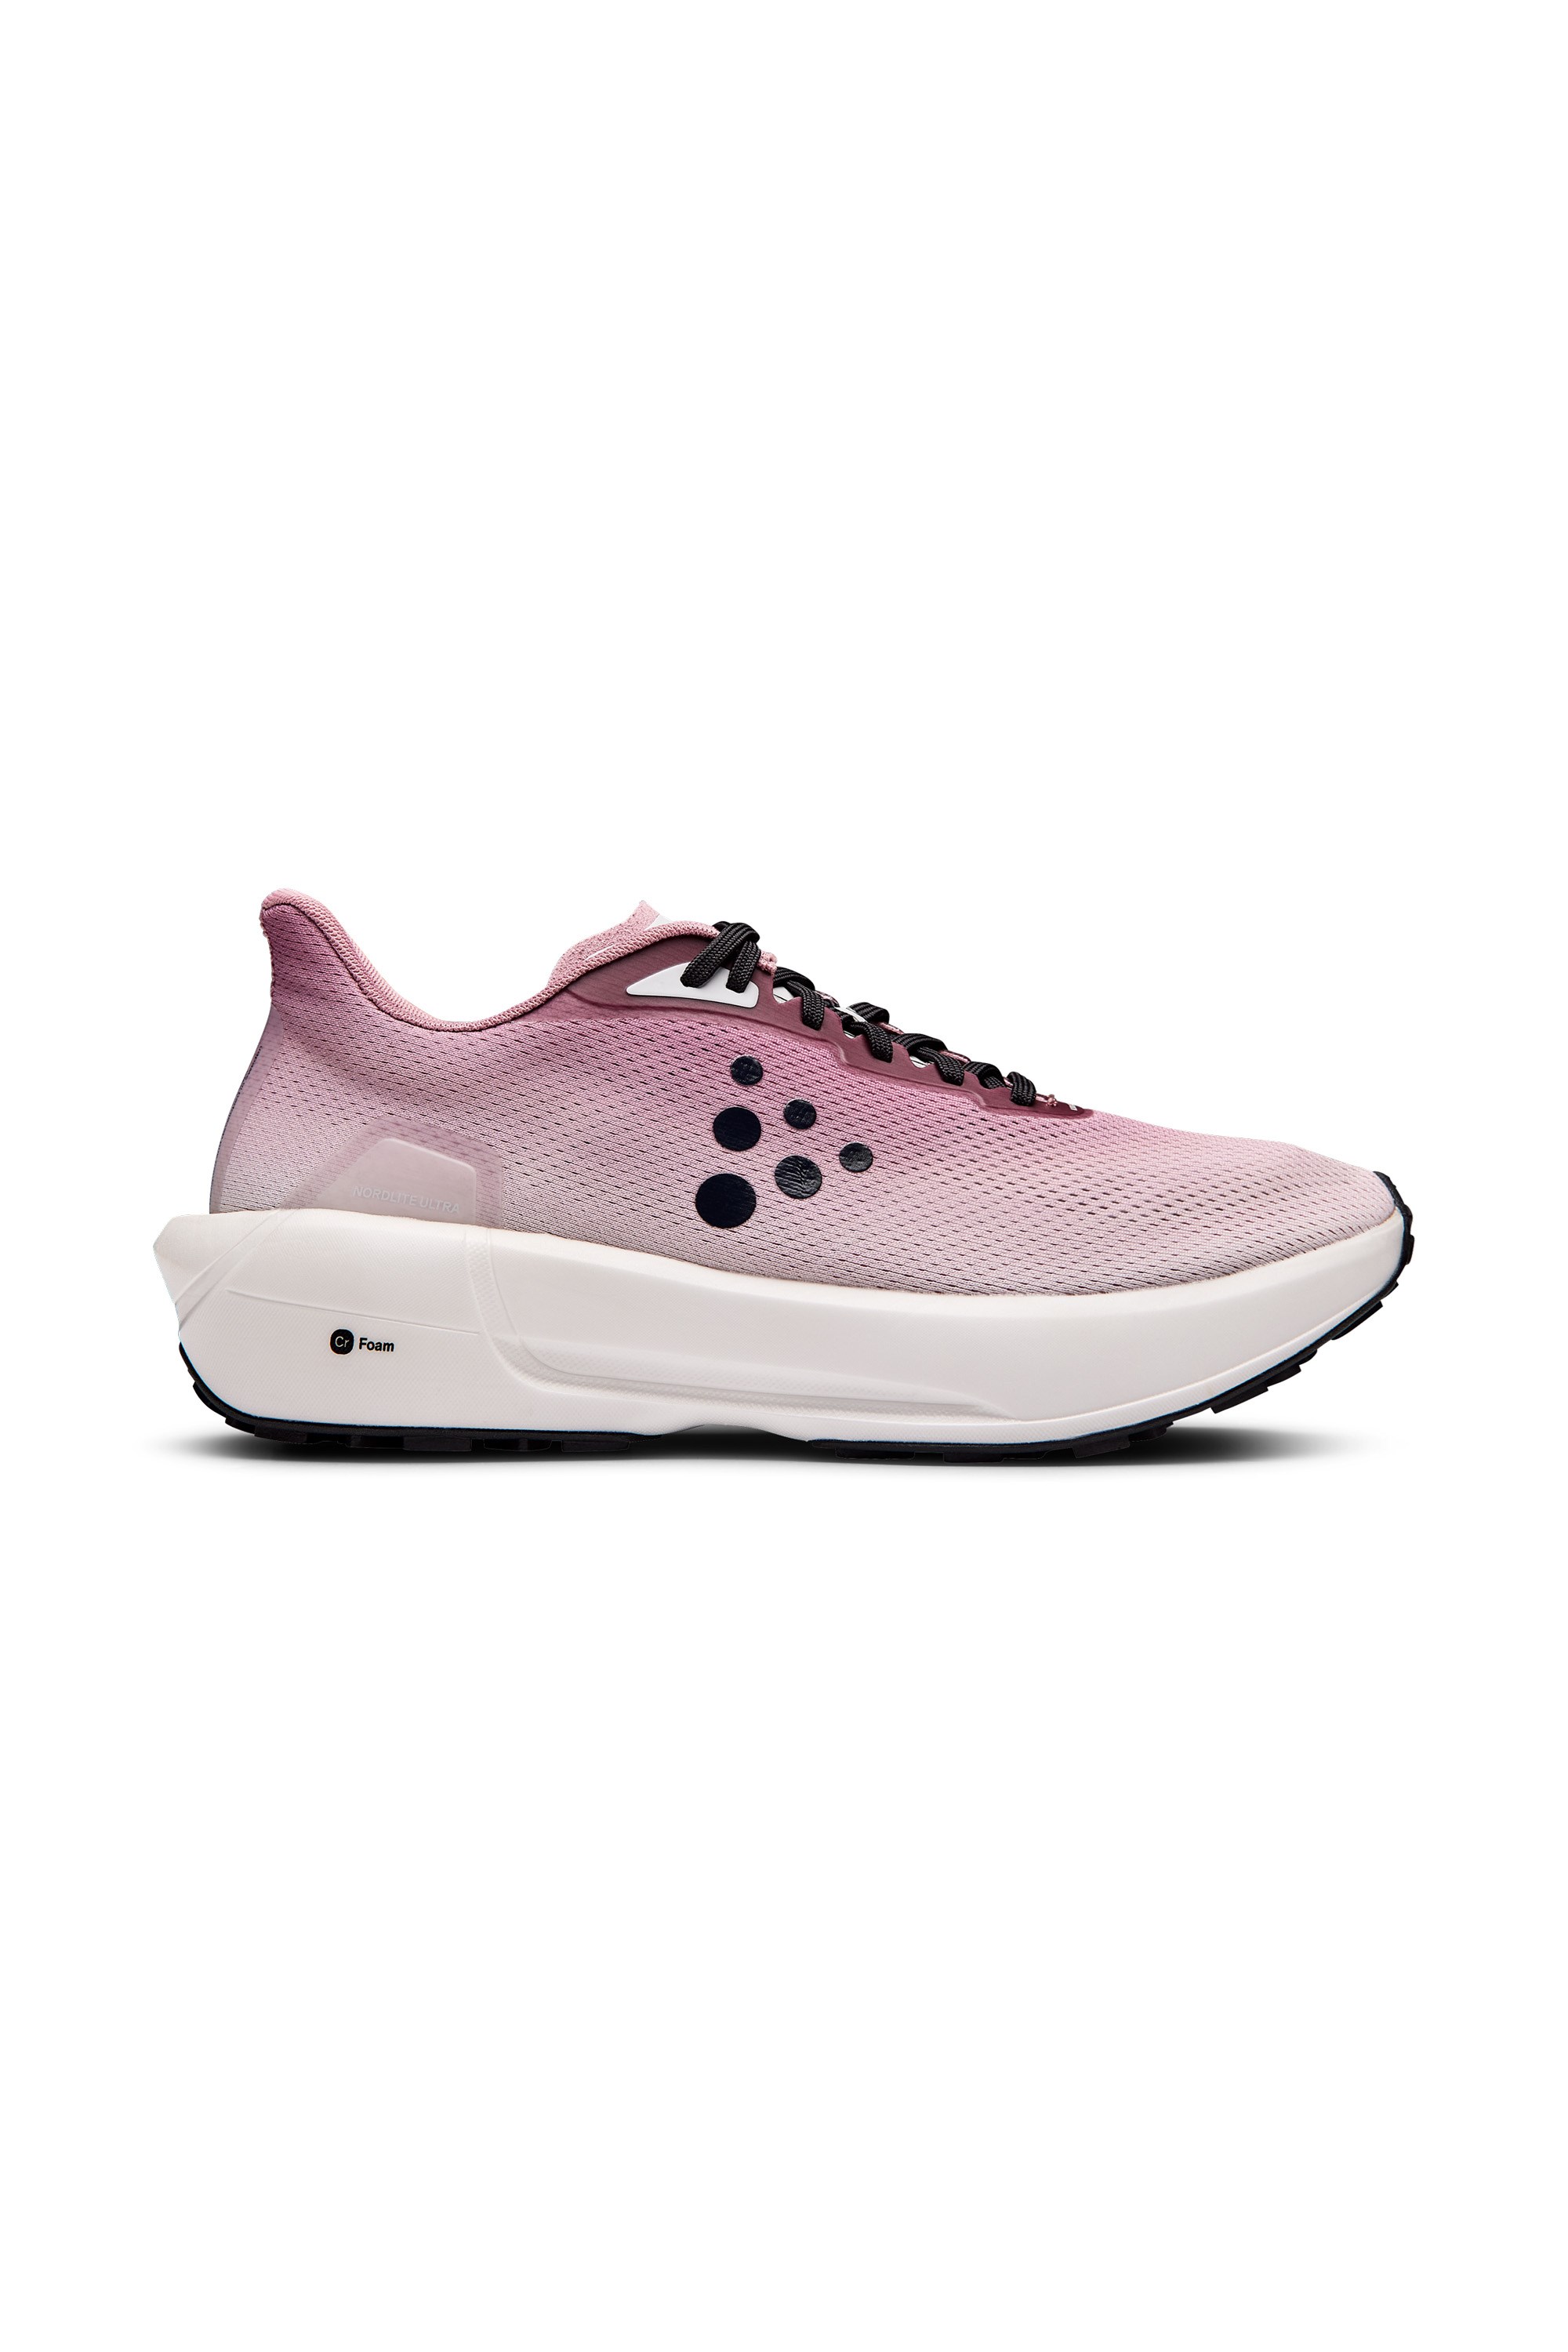 Nordlite Womens Ultra Trainers -